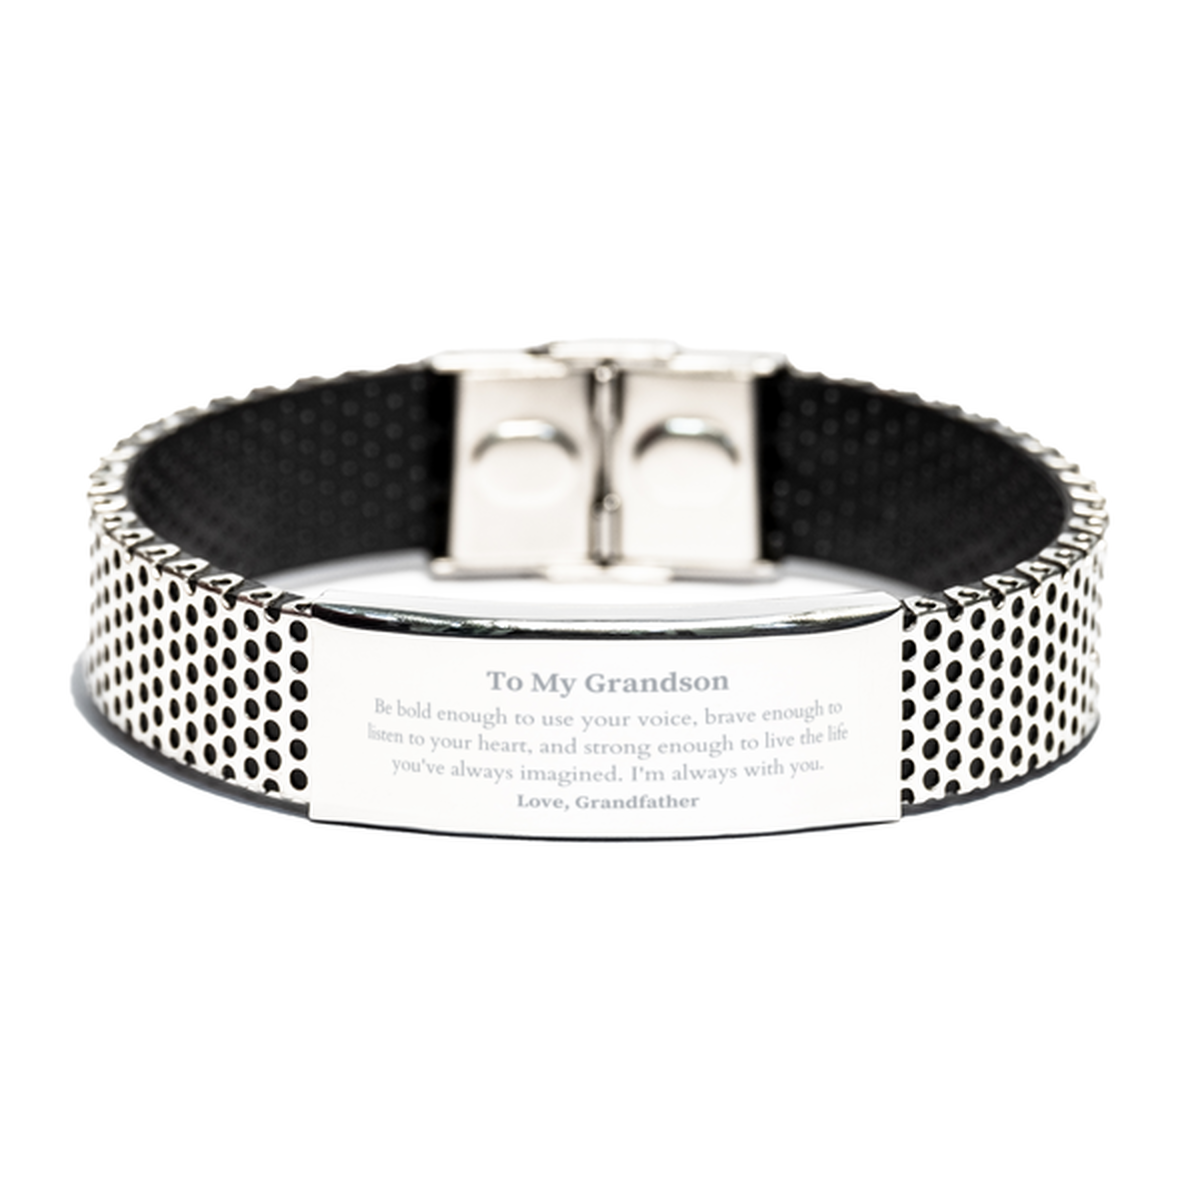 Keepsake Grandson Stainless Steel Bracelet Gift Idea Graduation Christmas Birthday Grandson from Grandfather, Grandson Be bold enough to use your voice, brave enough to listen to your heart. Love, Grandfather